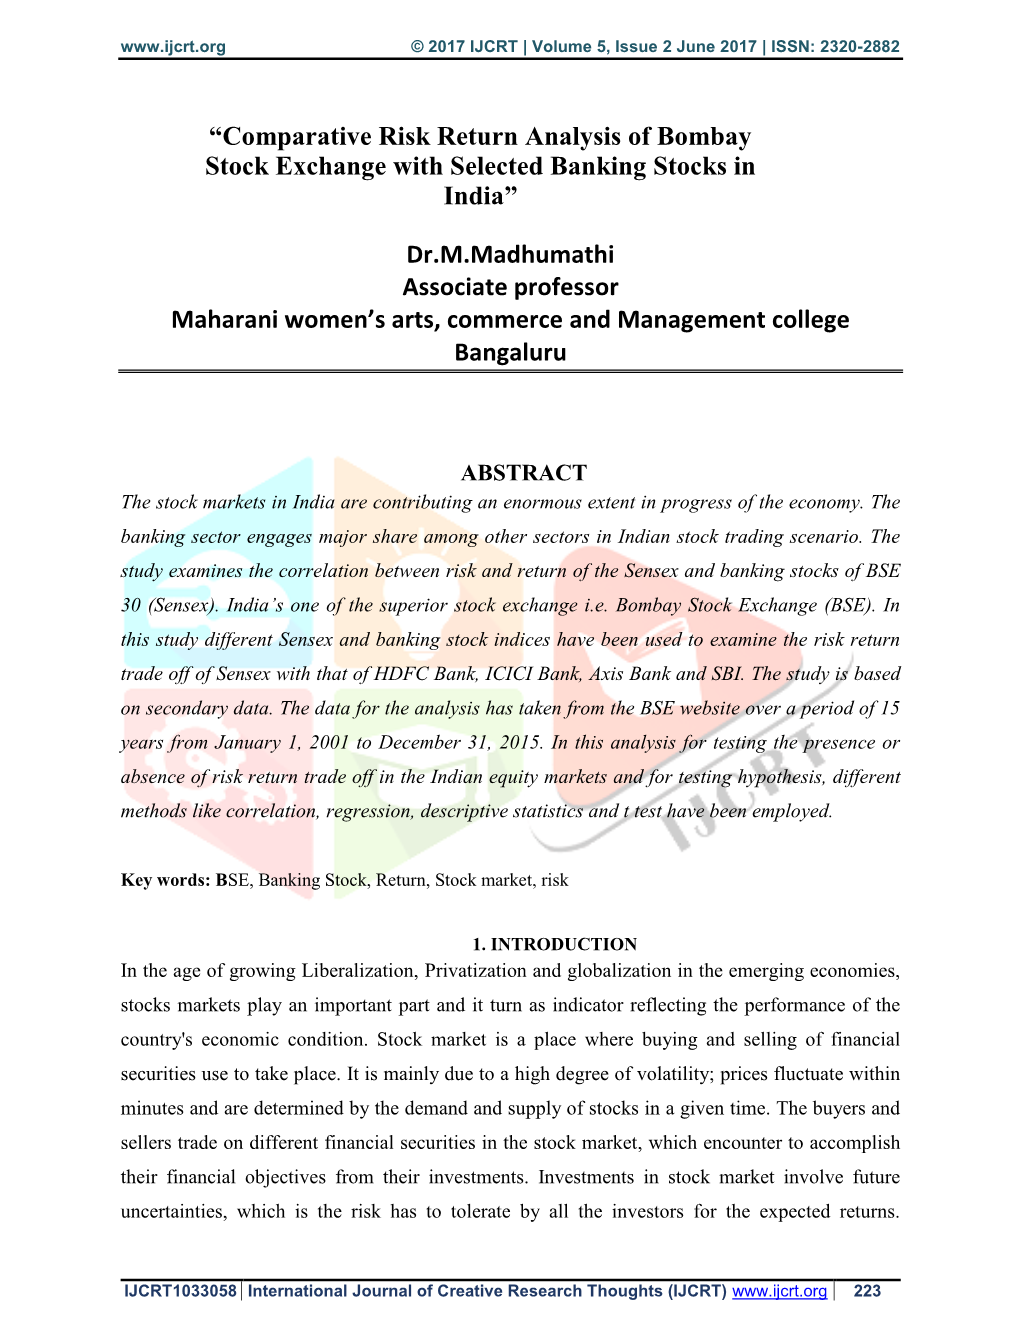 Comparative Risk Return Analysis of Bombay Stock Exchange with Selected Banking Stocks in India”